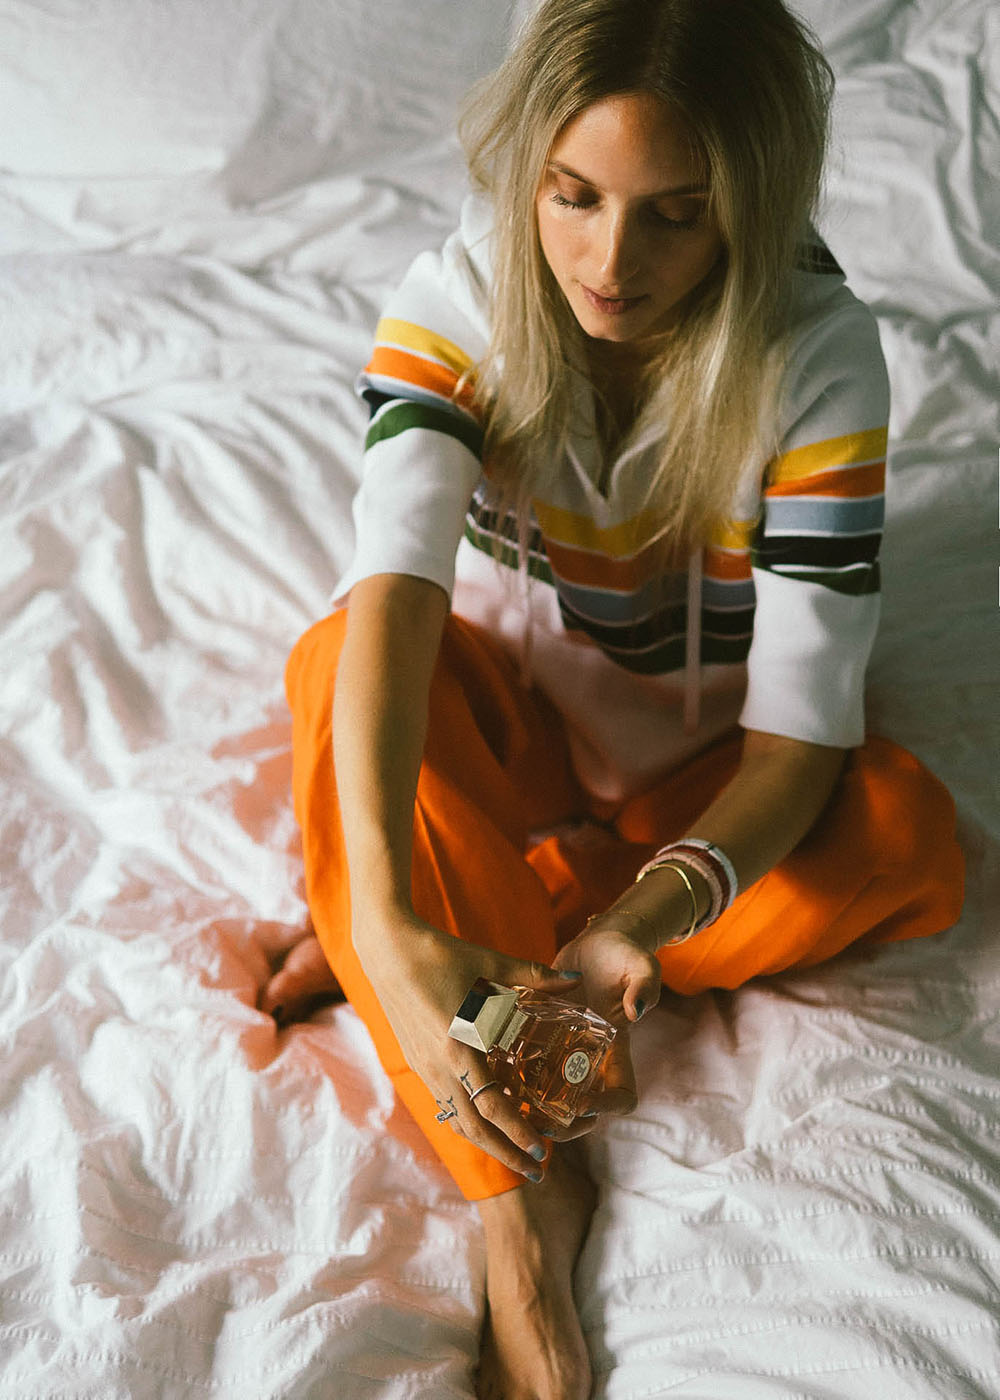 Charlotte Groeneveld Thefashionguitar for Tory Burch Love Relentlessly